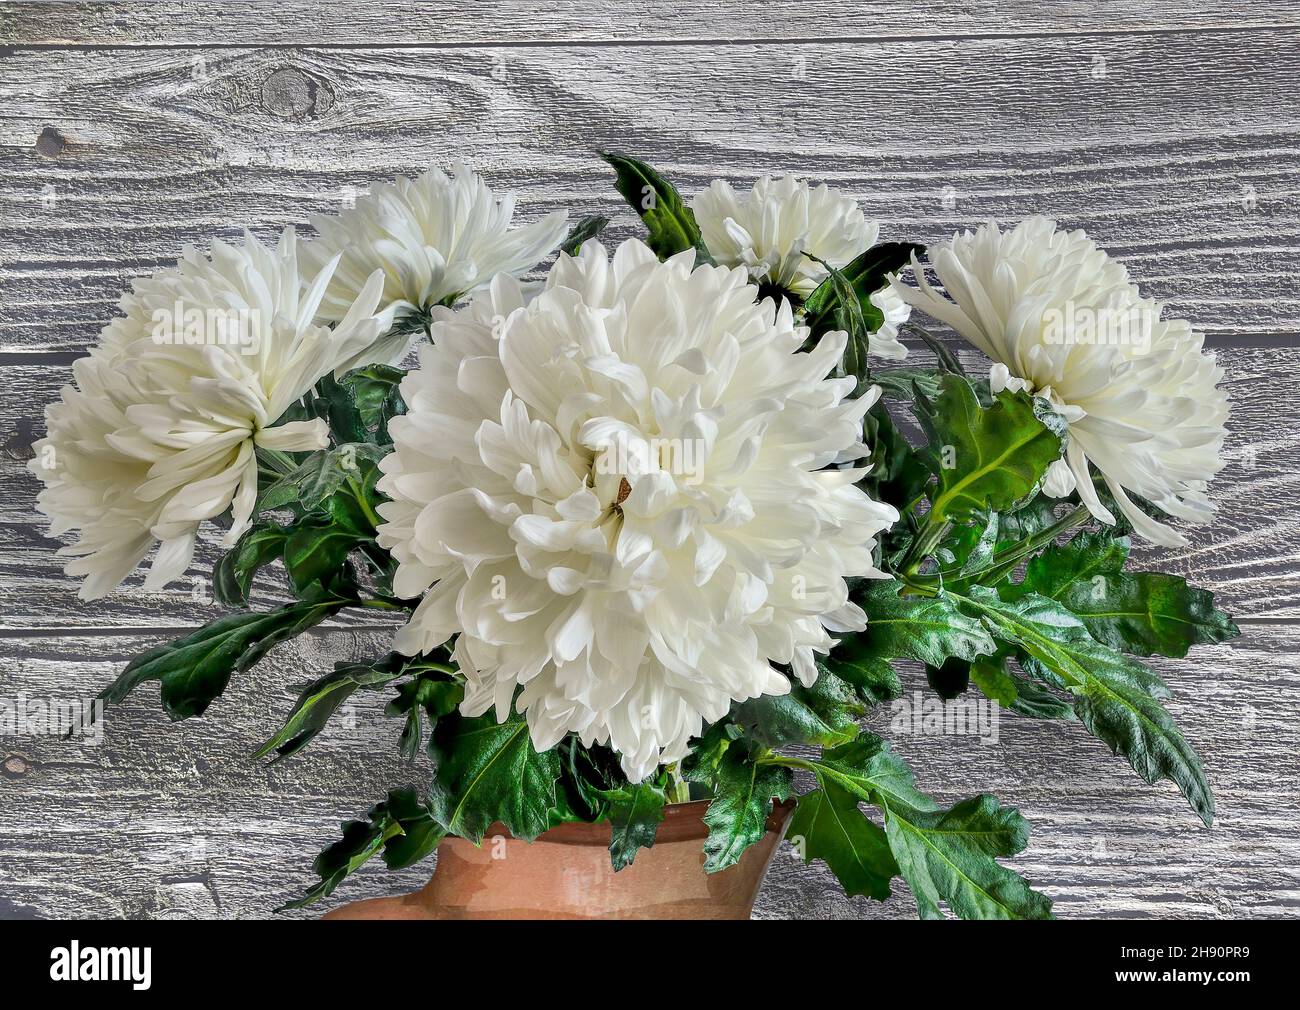 Bouquet of white fluffy chrysanthemum flowers with green leaves close up on white wooden background. Rural floral composition - greeting card for any Stock Photo